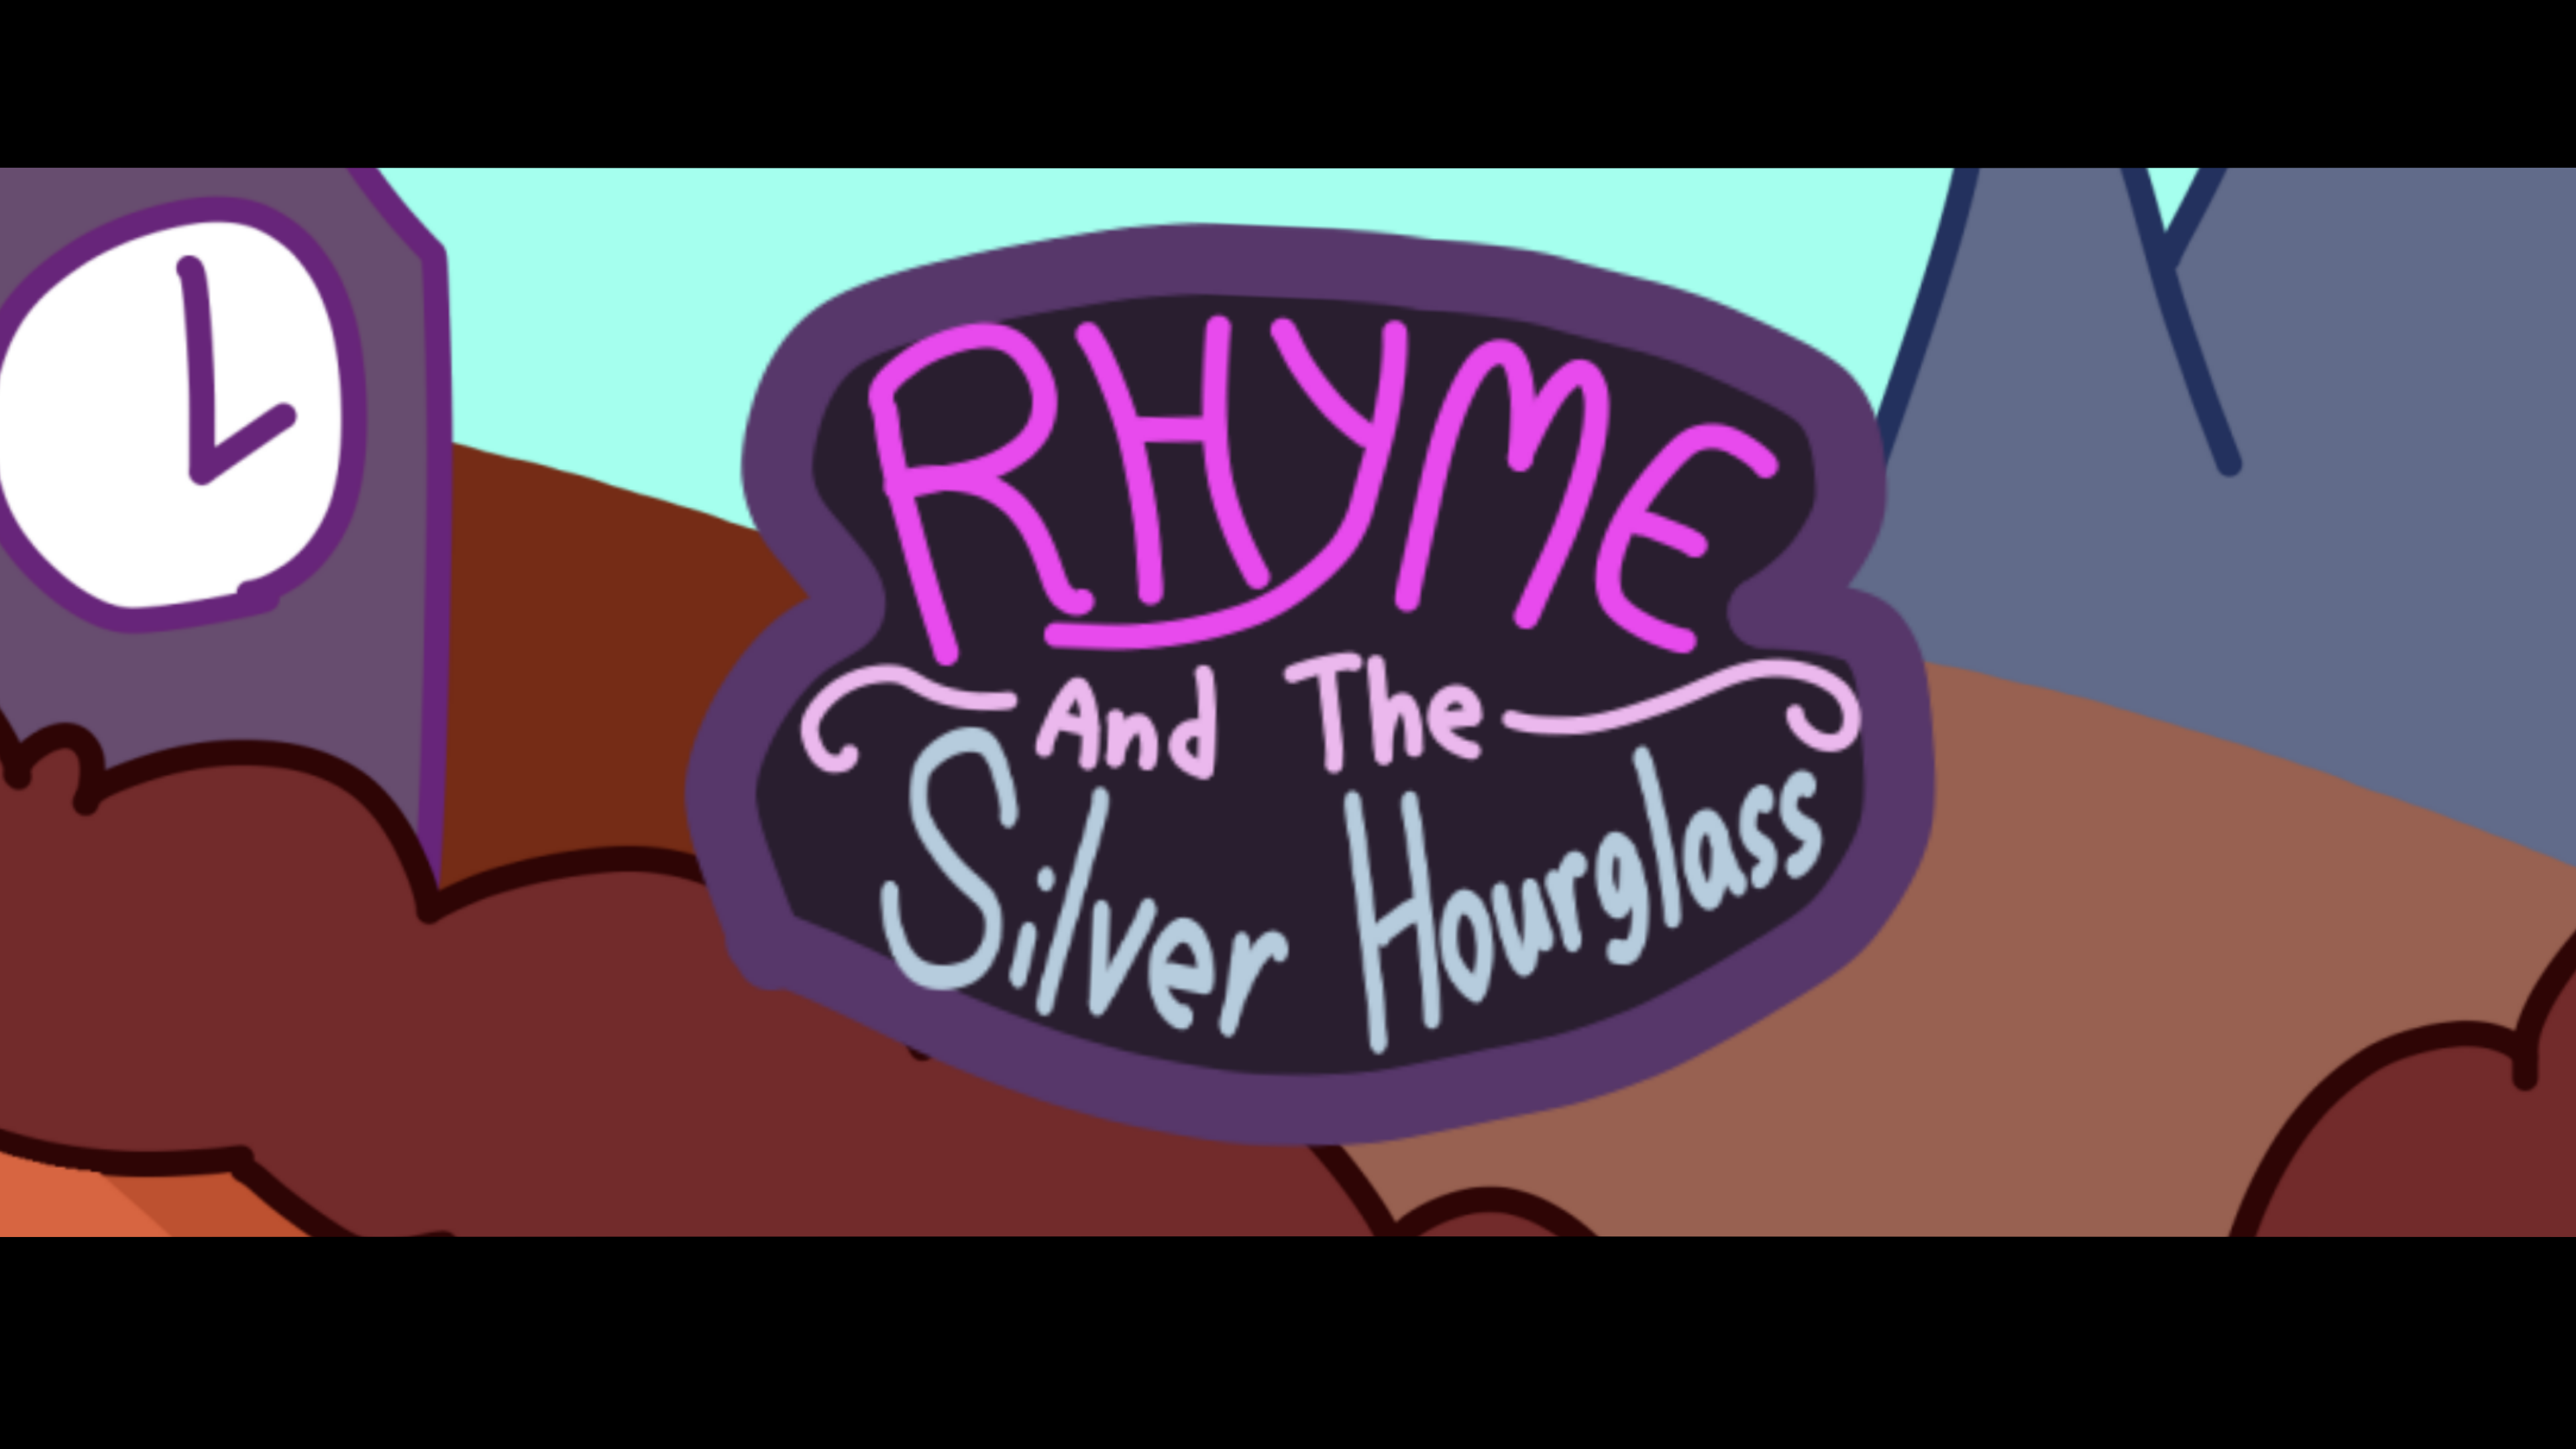 Rhyme and the Silver Hourglass